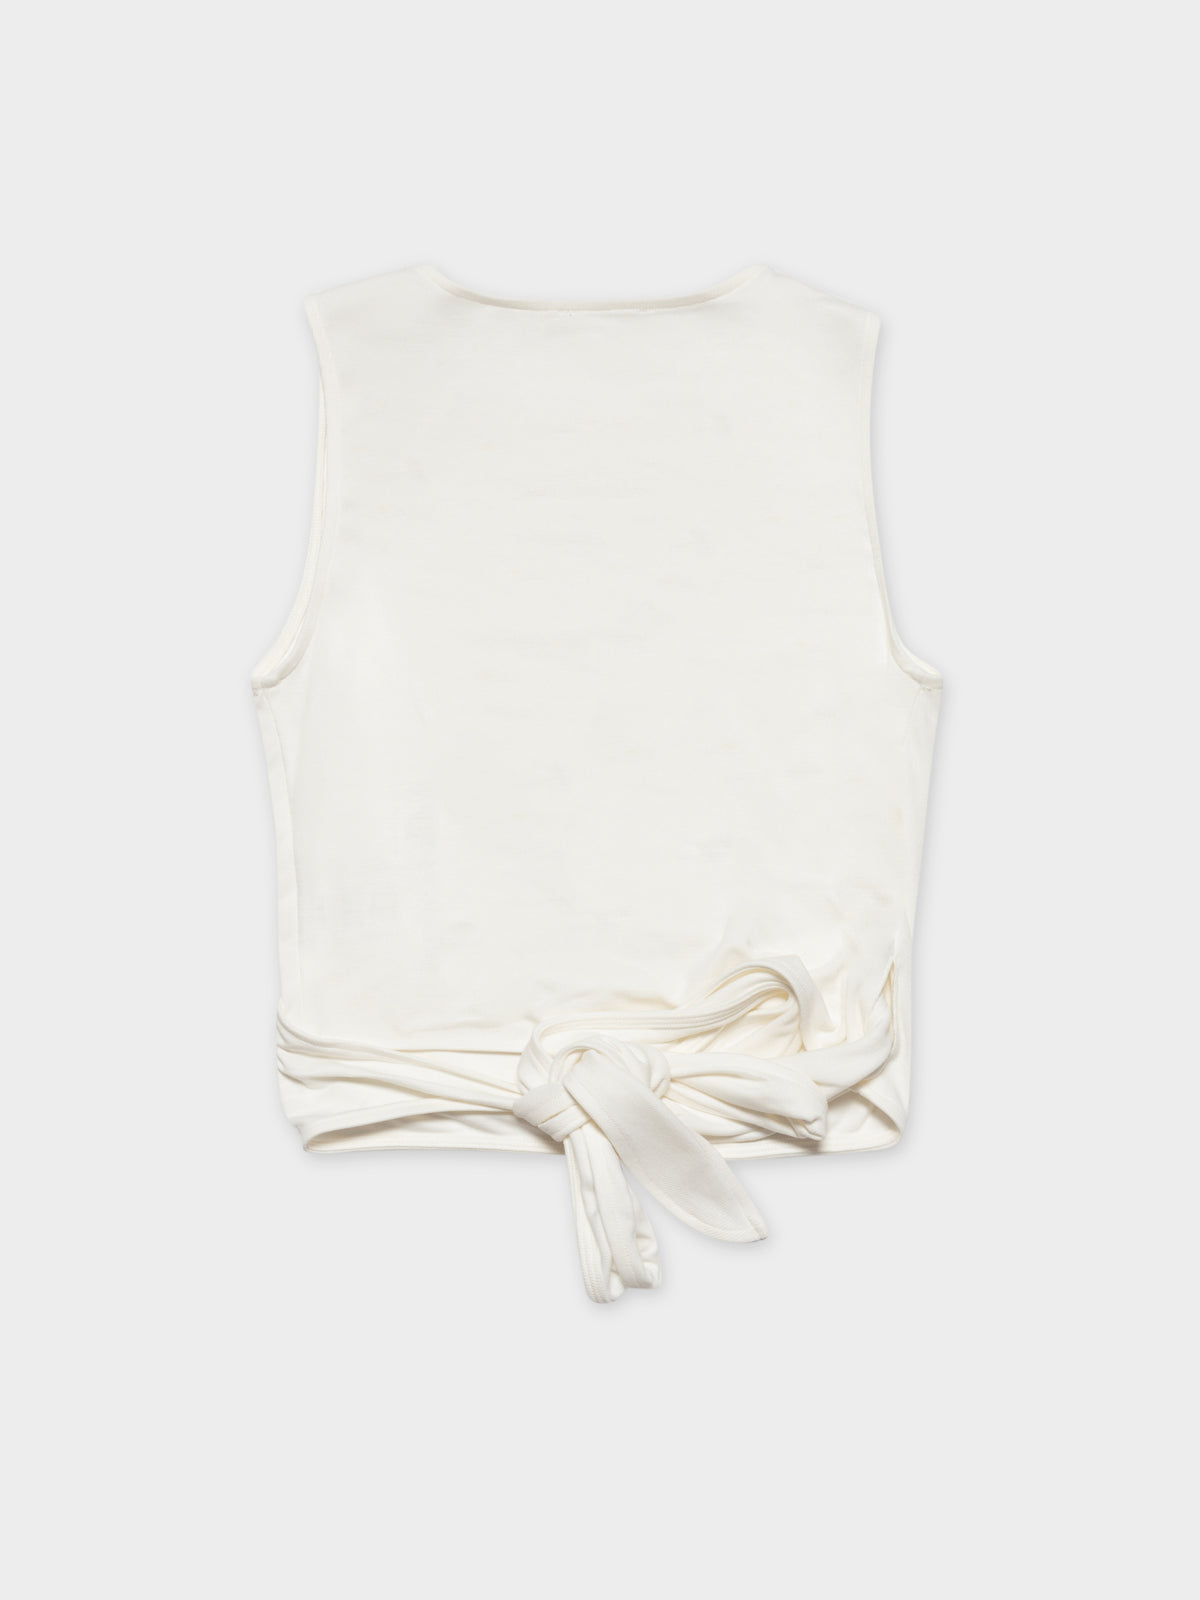 Arlo Top in Ivory